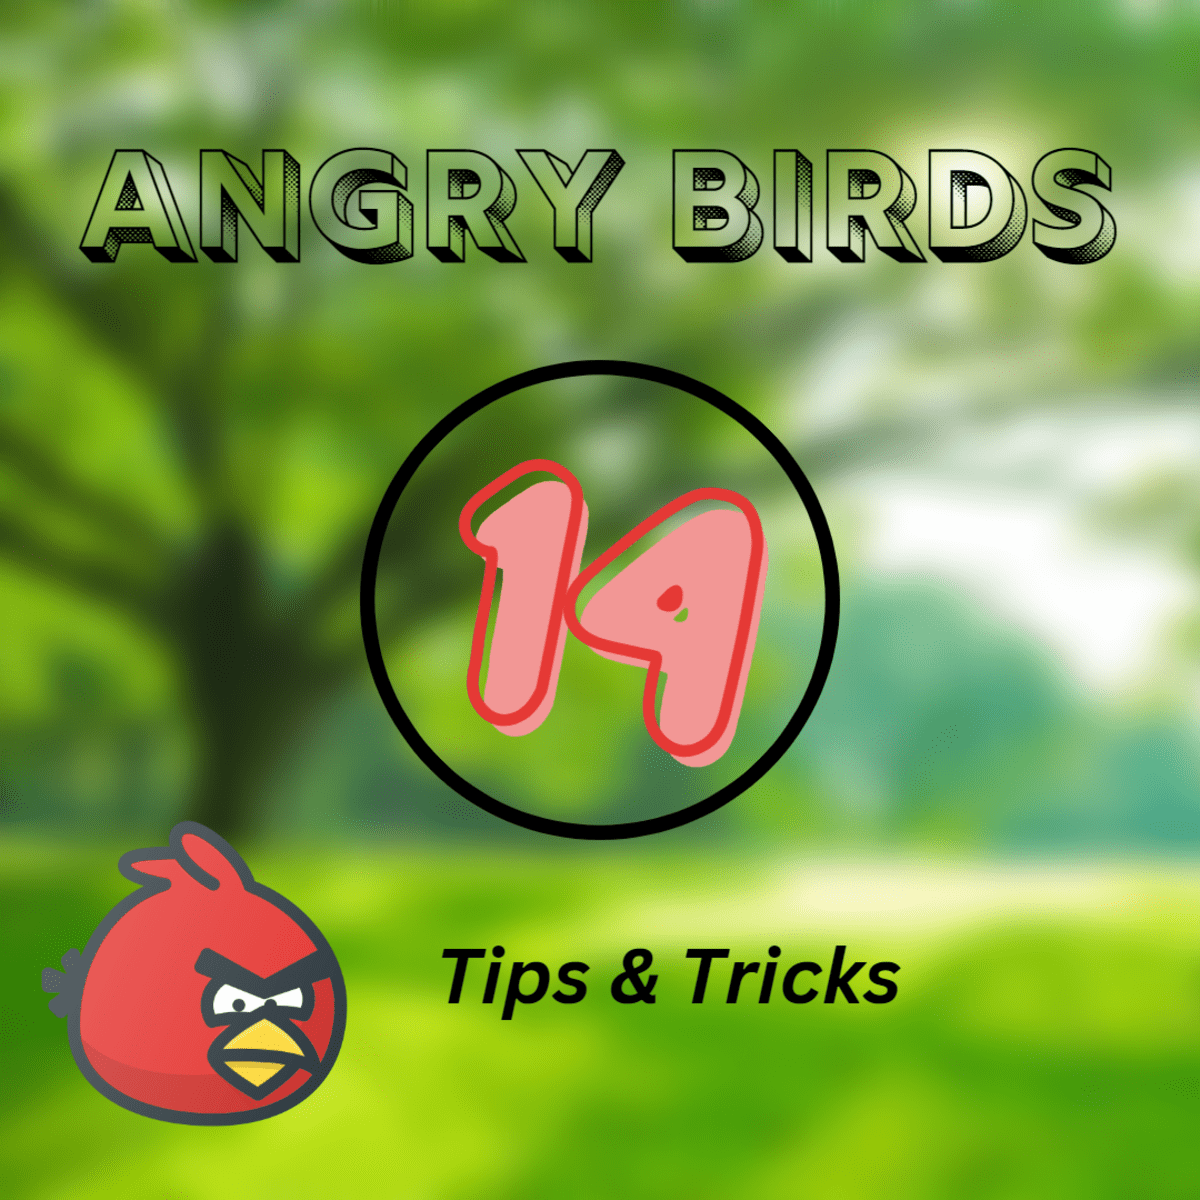 Angry Birds Epic Guide, Complete Breakdown of All Enemy Pigs & Bosses